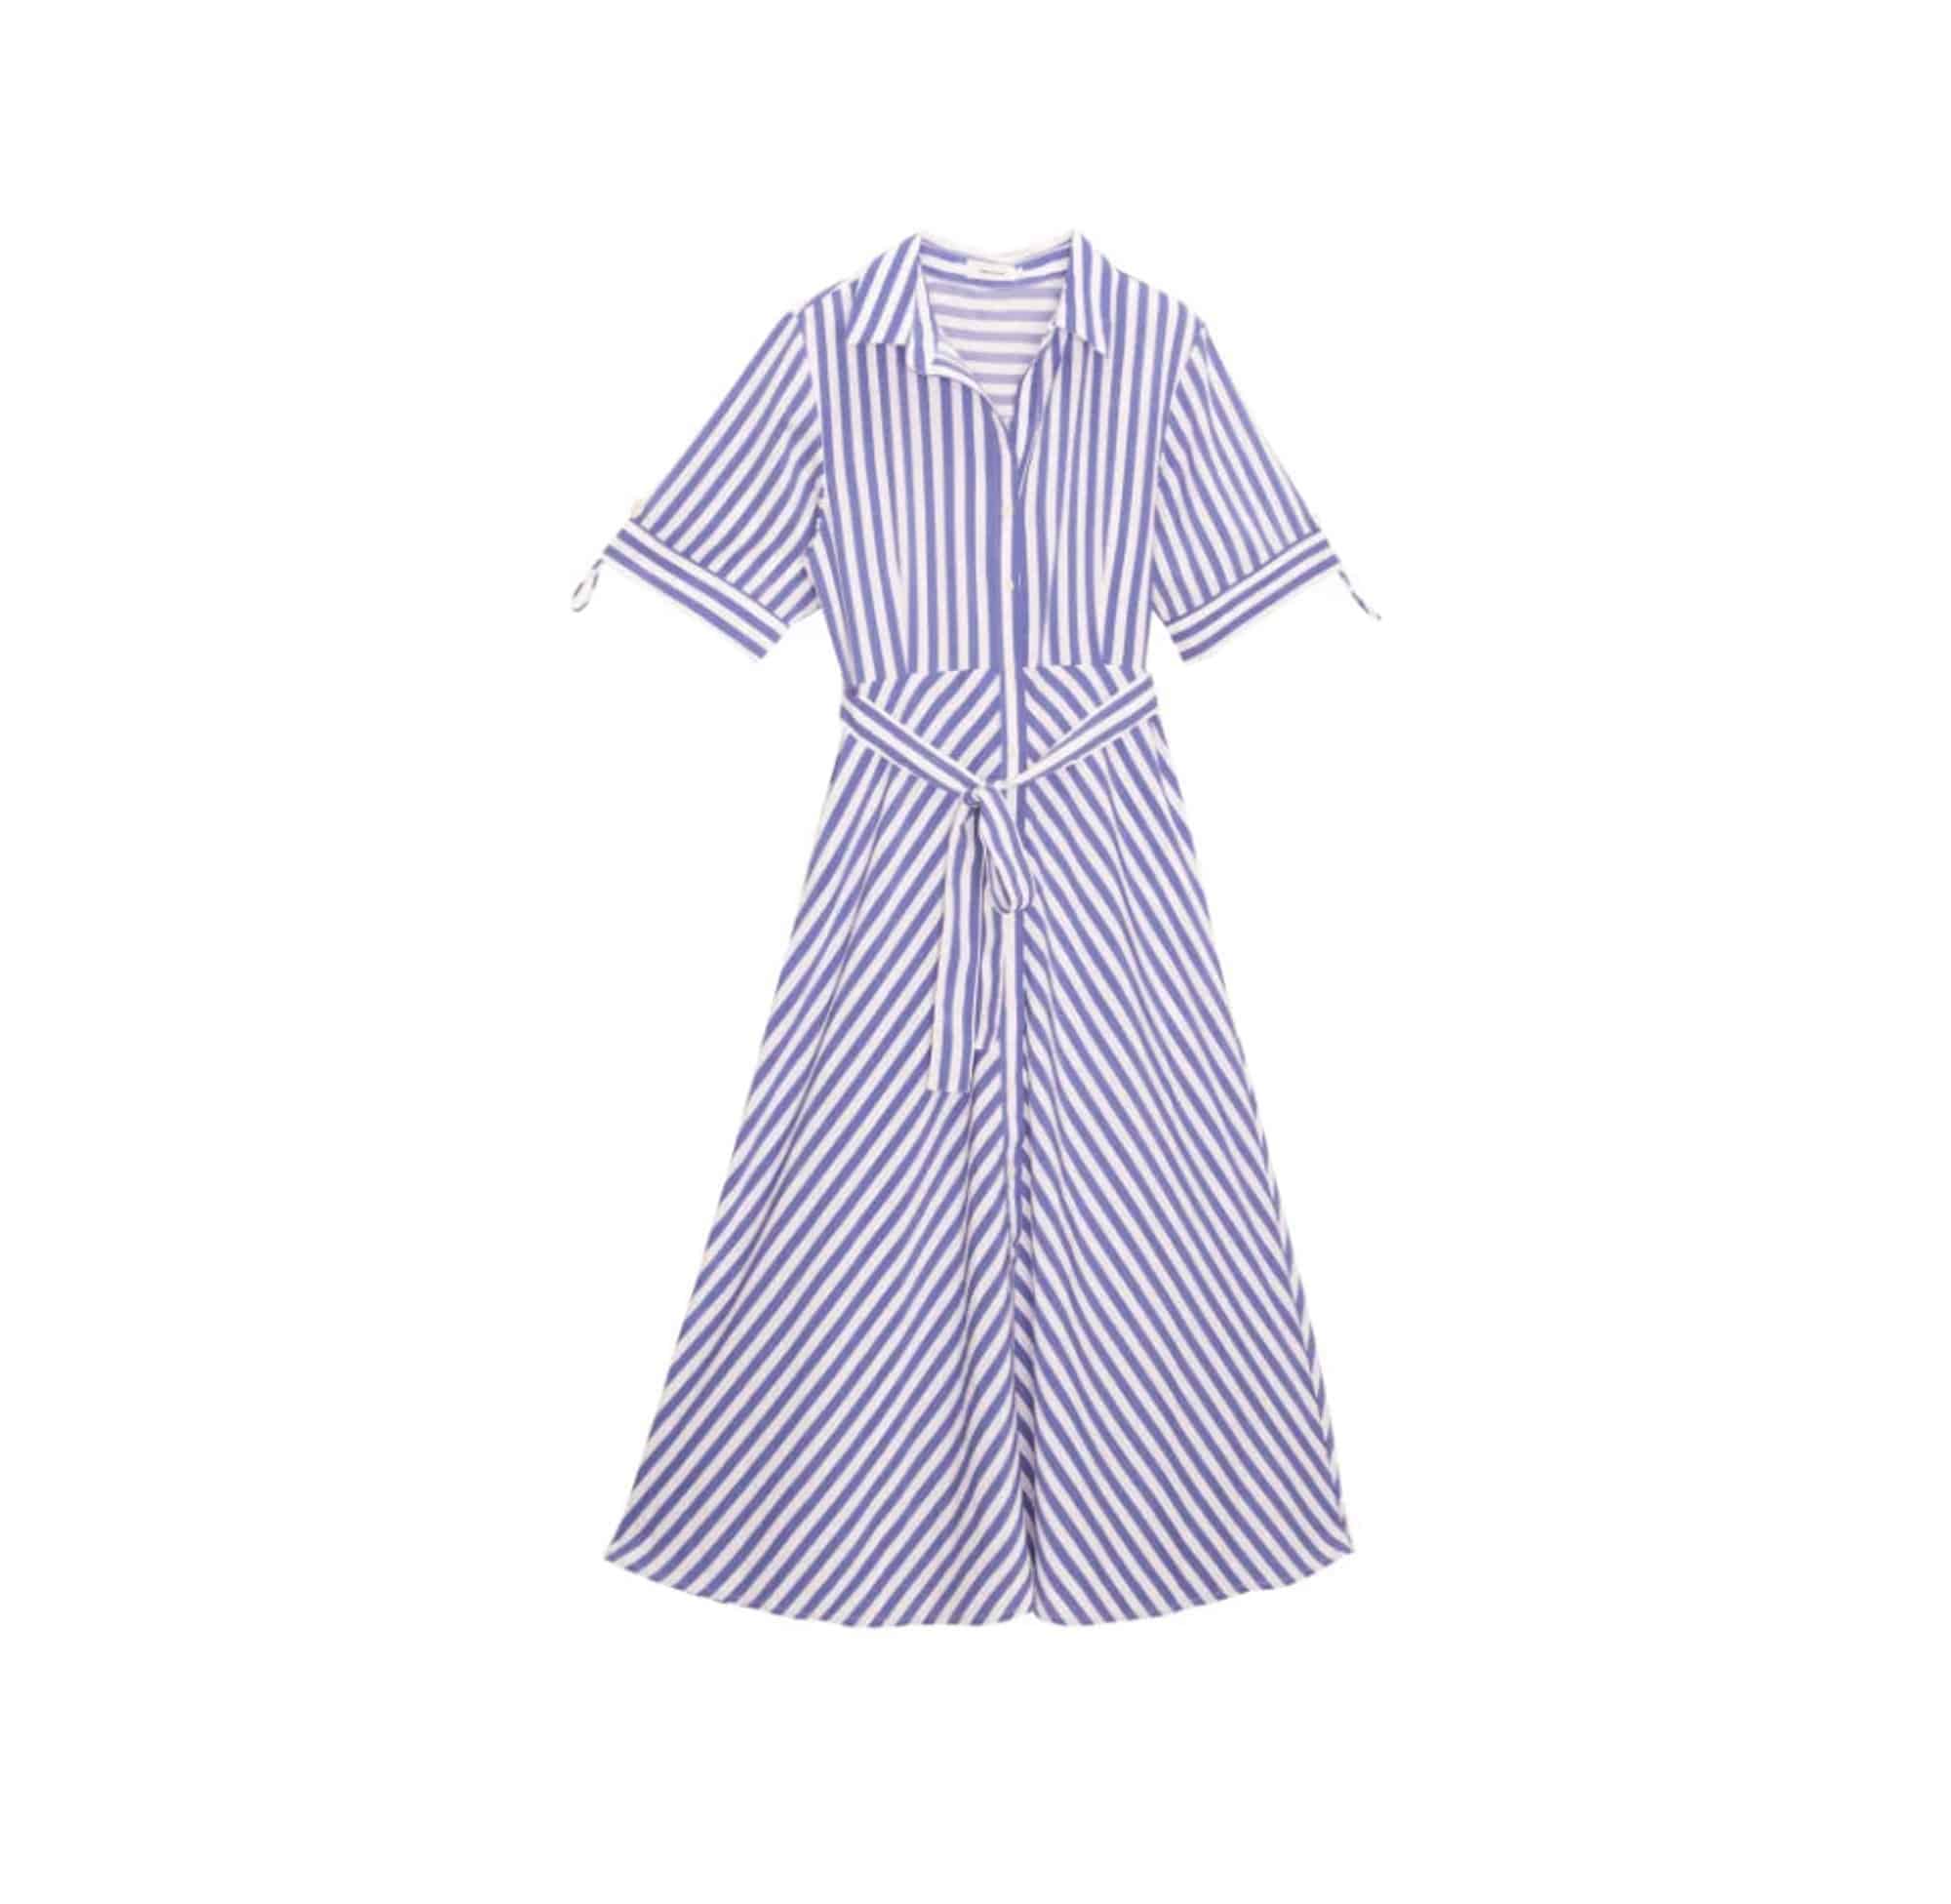 Sweewe Striped Dress in White and Blue 